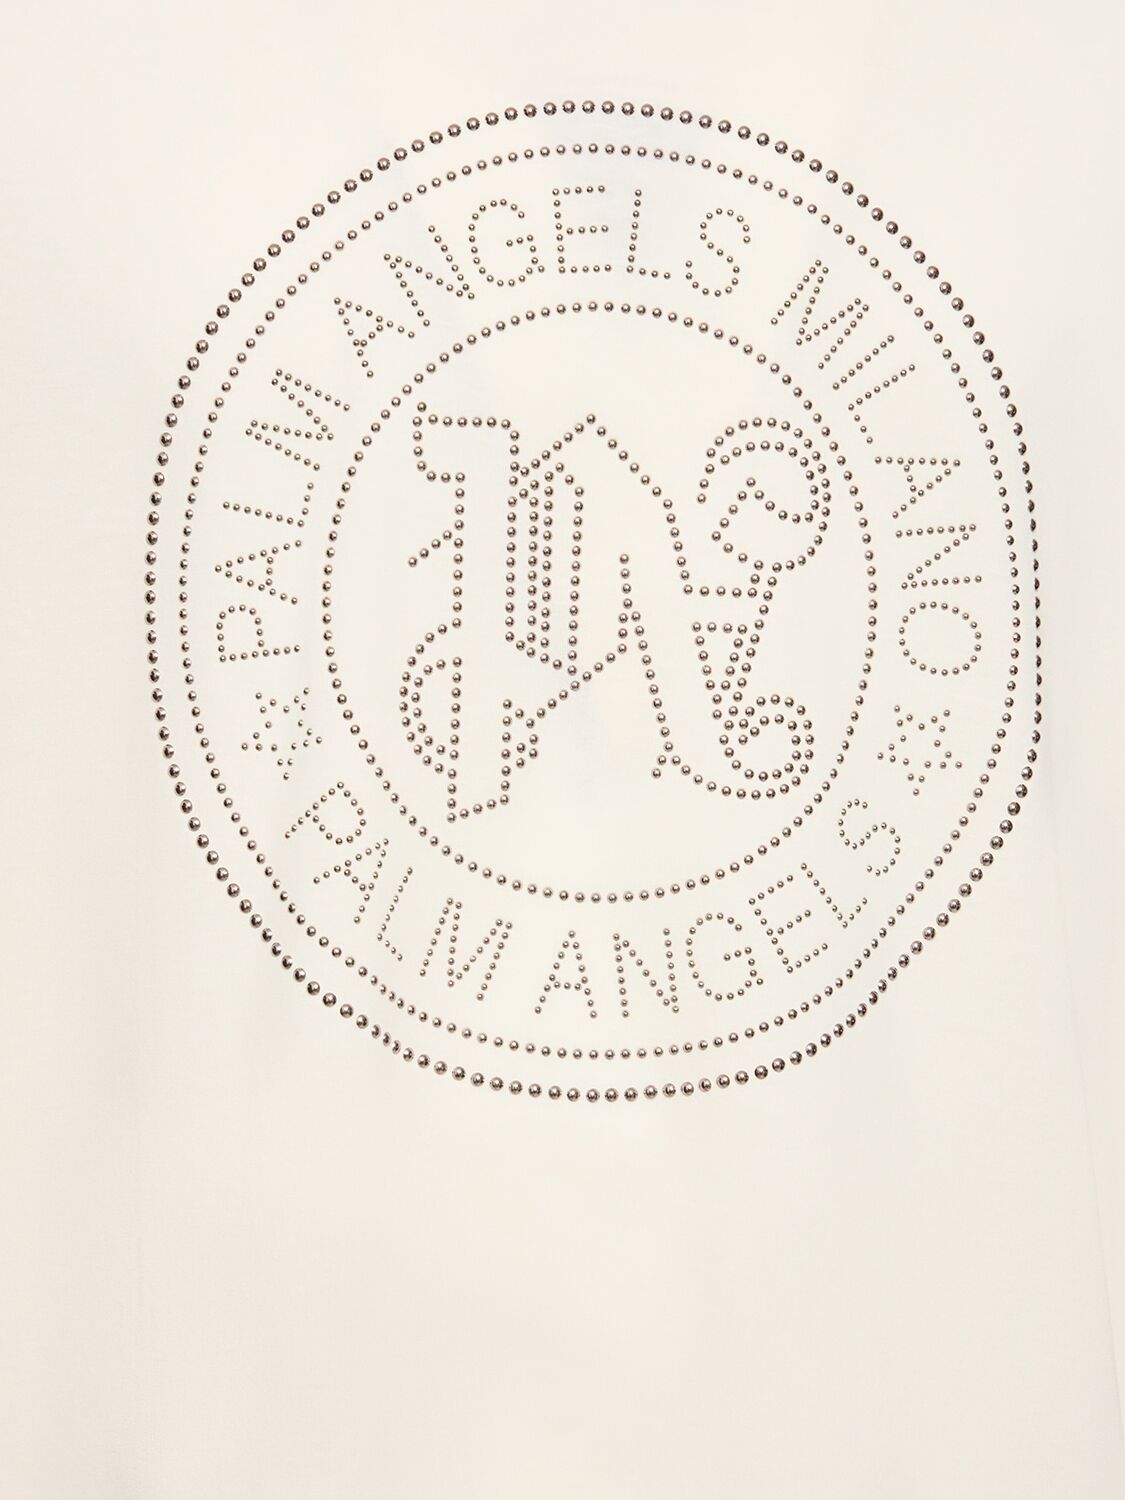 Shop Palm Angels Milano Stud Cotton T-shirt In Off White